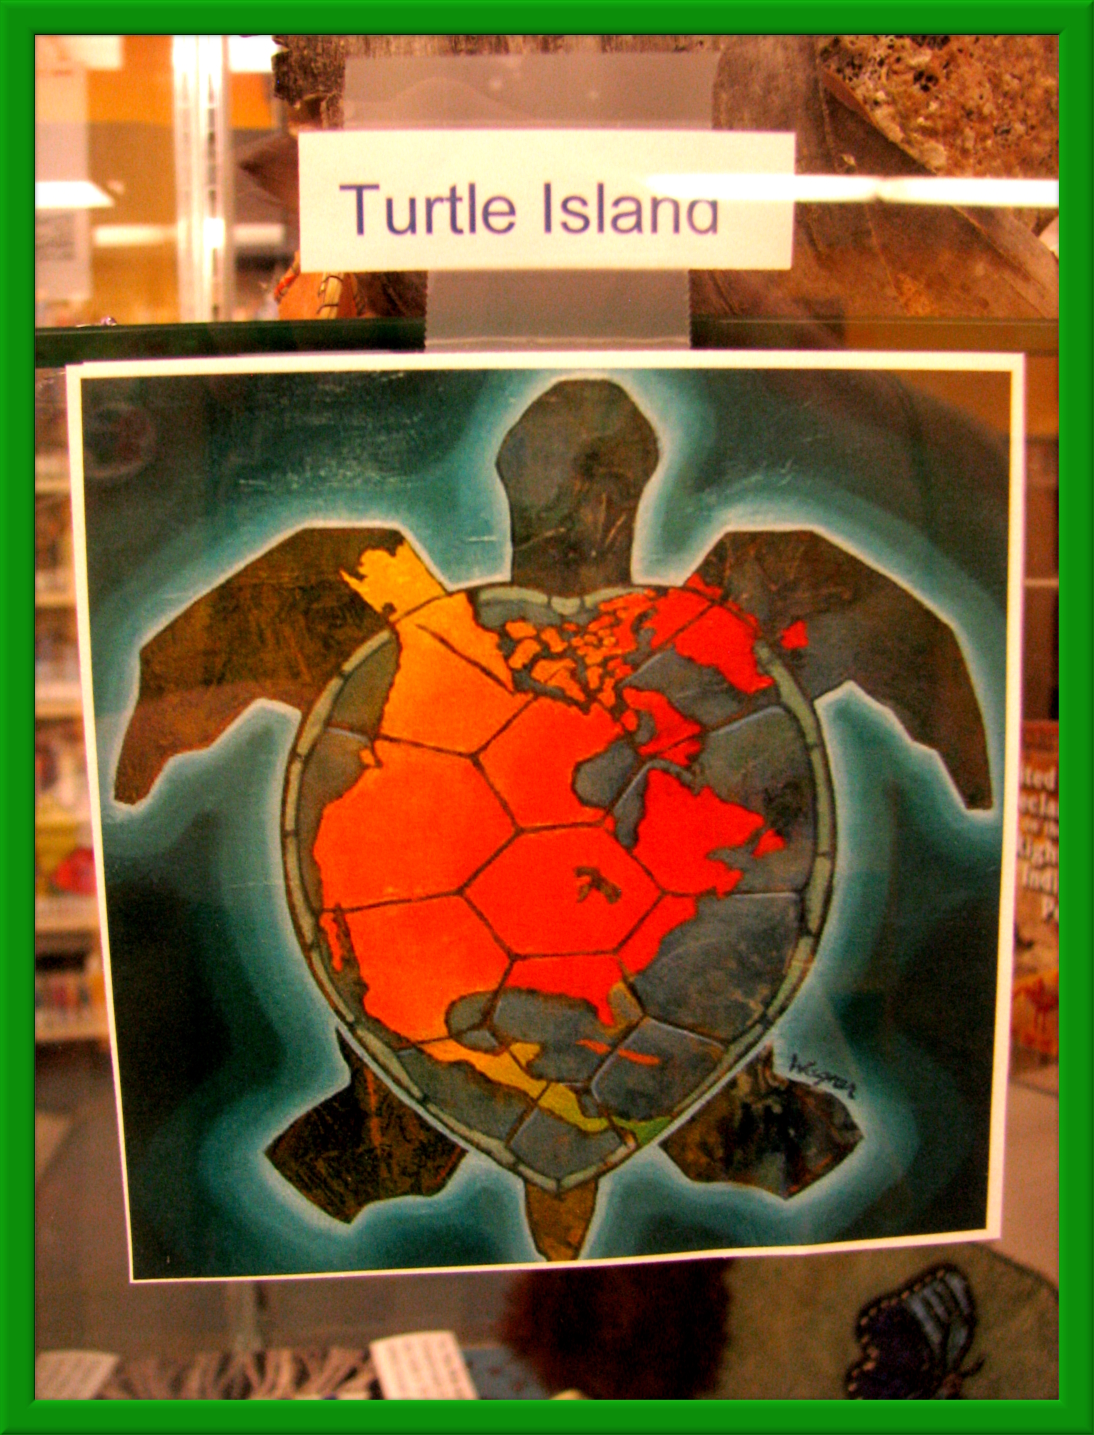 Turtle Island (by Mark Wagner)